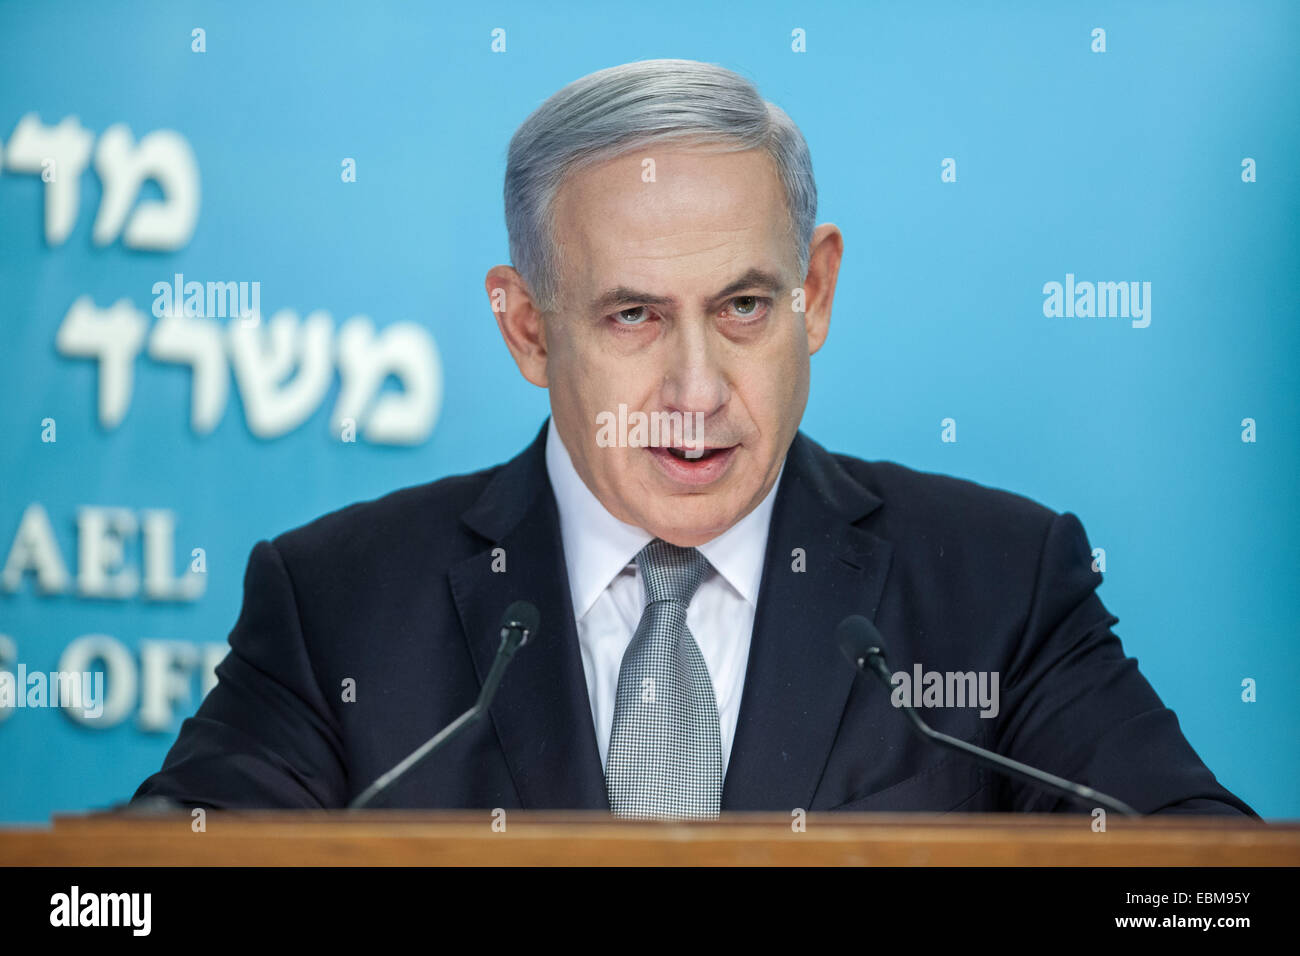 Jerusalem. 2nd Dec, 2014. Israeli Prime Minister Benjamin Netanyahu addresses a press conference at the Prime Minister's office in Jerusalem, on Dec. 2, 2014. Israeli Prime Minister Benjamin Netanyahu announced his support for dispersing the Knesset (parliament) and conducting early elections amid a coalition crisis. During a press conference at his Jerusalem office, Netanyahu also said he has ordered to fire Justice Minister Tzipi Livni and Finance Minister Yair Lapid, who he said plotted against him by outspokenly criticizing his policies. Credit:  JINI/Emil Salman/Xinhua/Alamy Live News Stock Photo